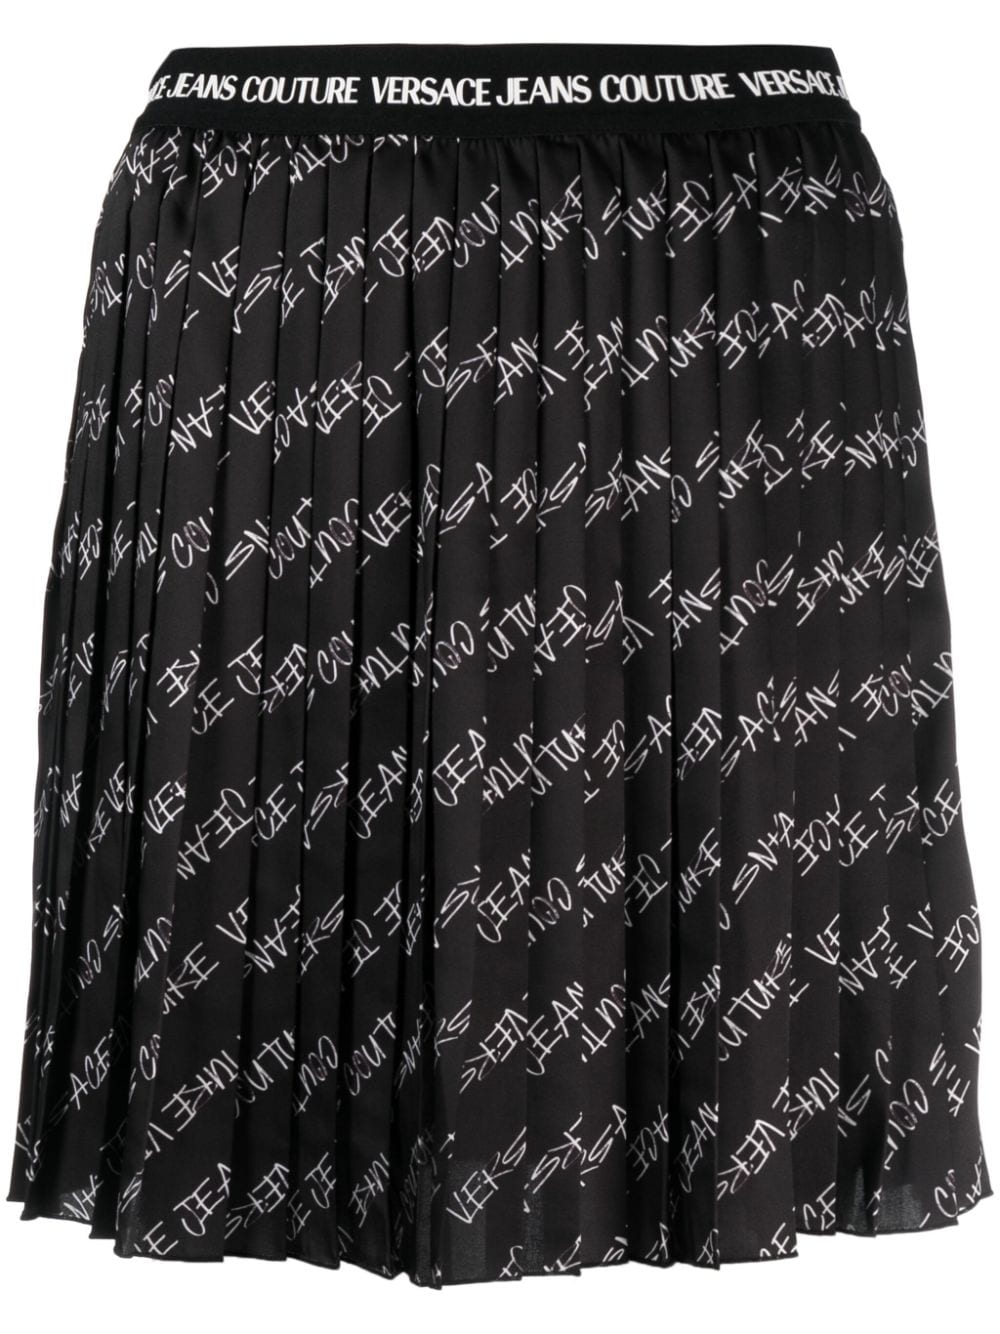 Versace Jeans Couture fully-pleated logo-print miniskirt - Black von Versace Jeans Couture